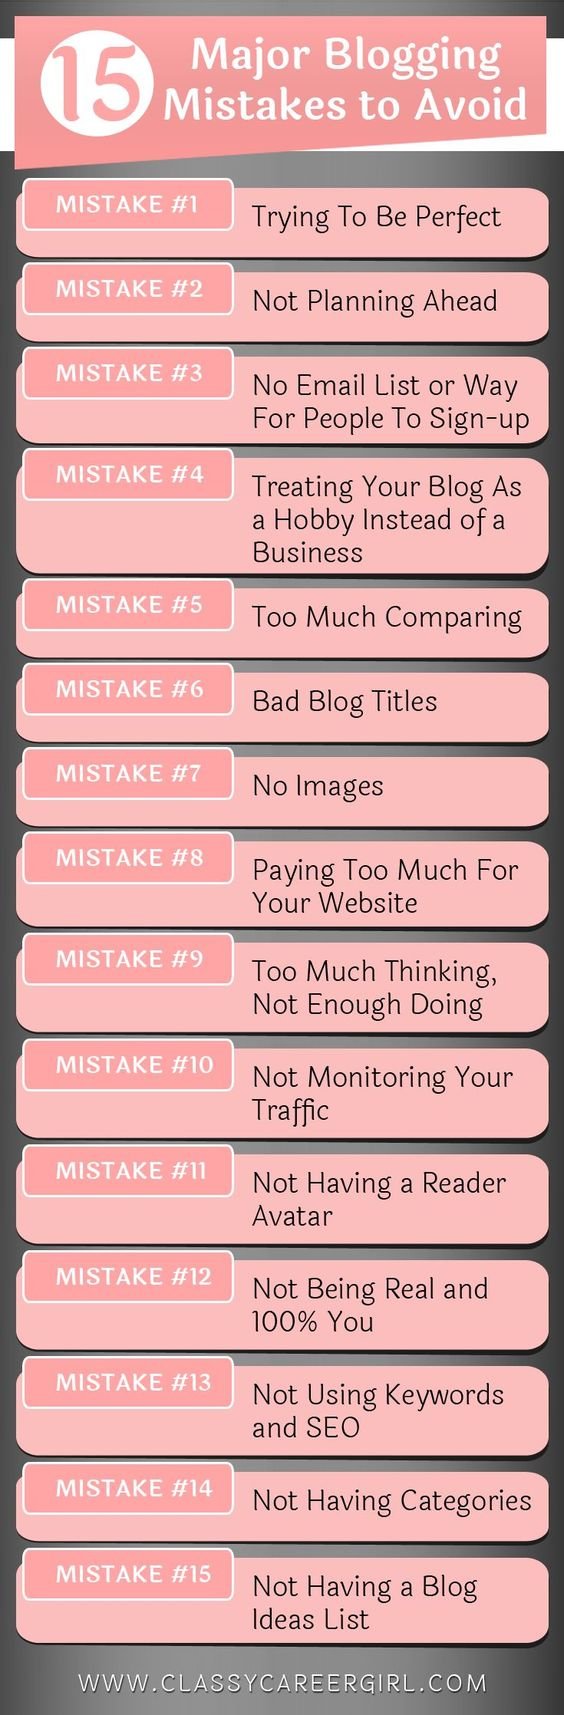 major-blogging-mistakes-to-avoid